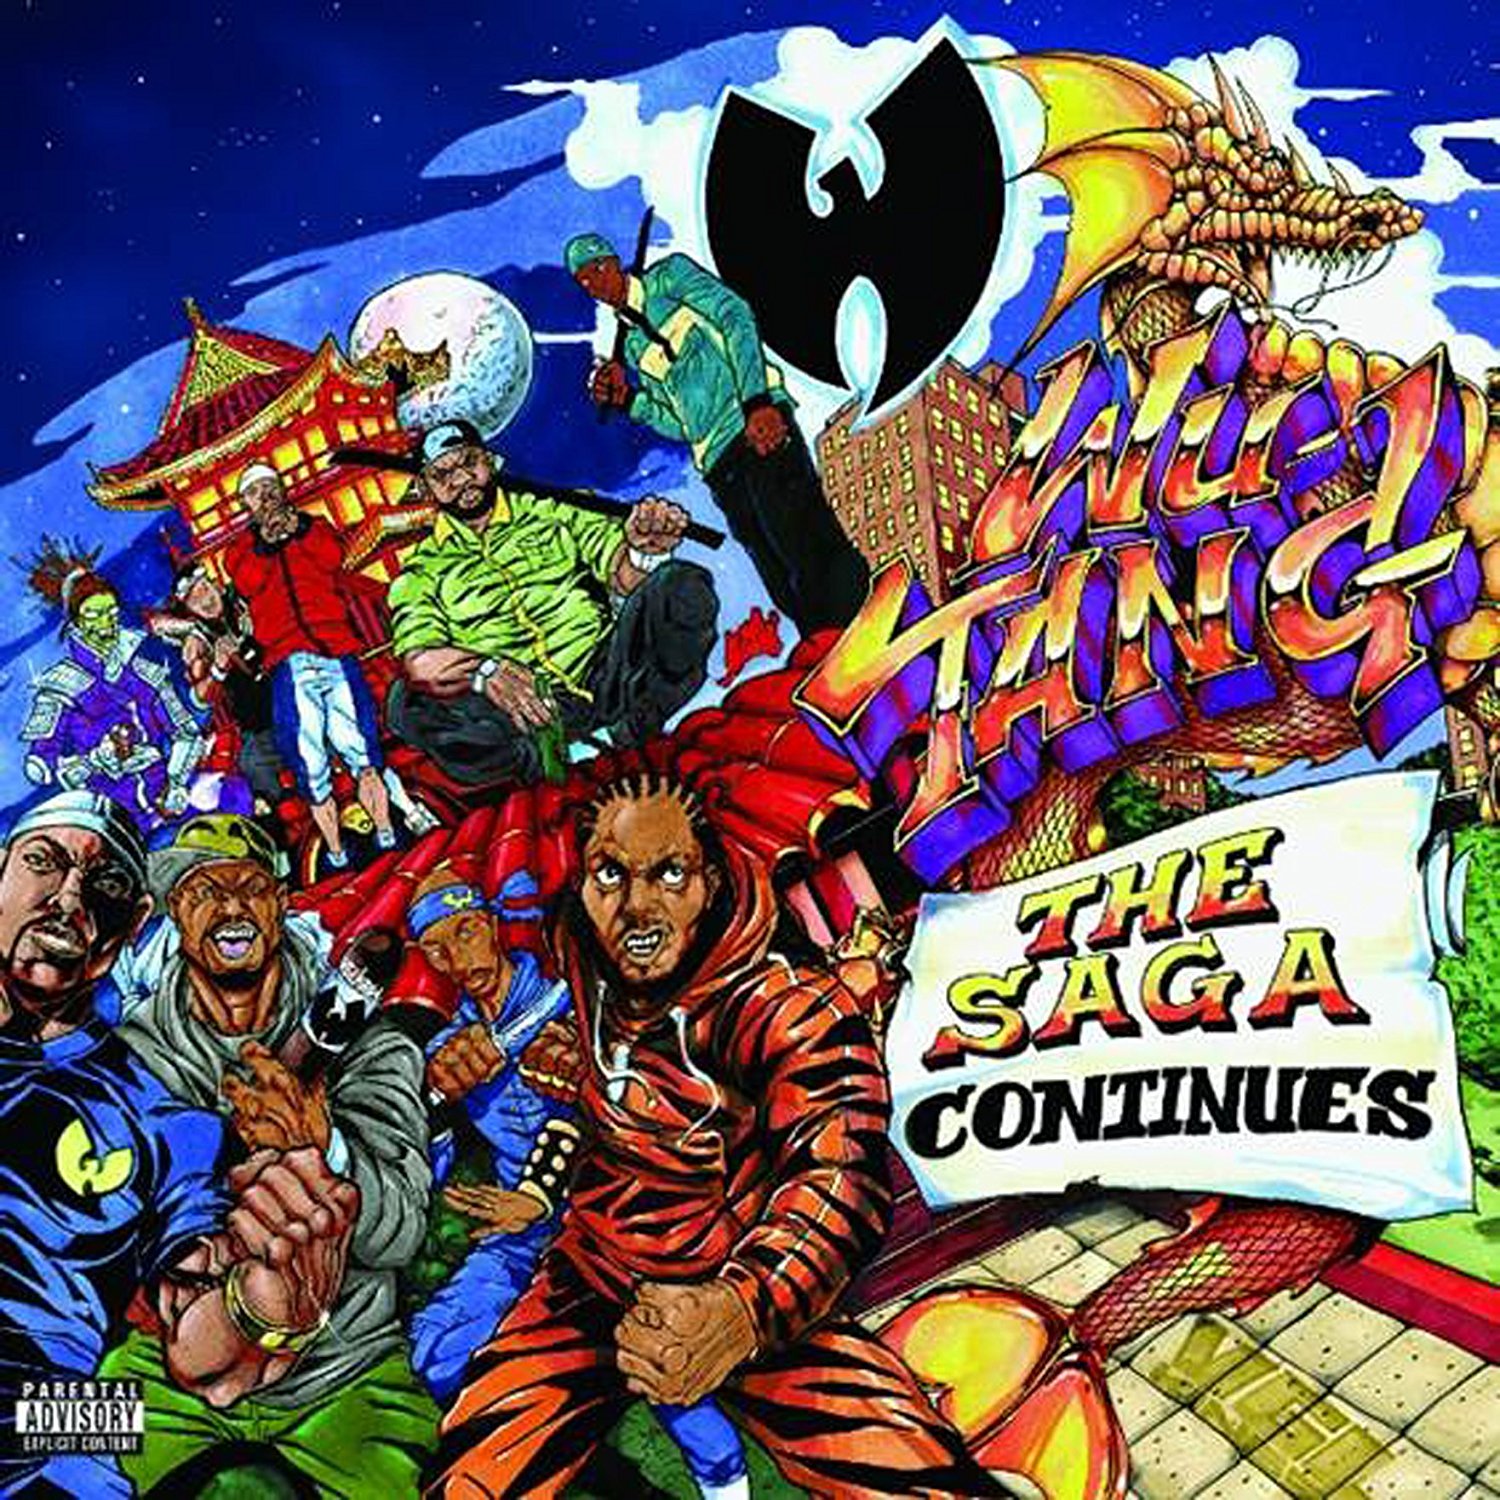 PHOTO: Wu-Tang's new album "The Saga Continues" was released, Oct. 13, 2017.